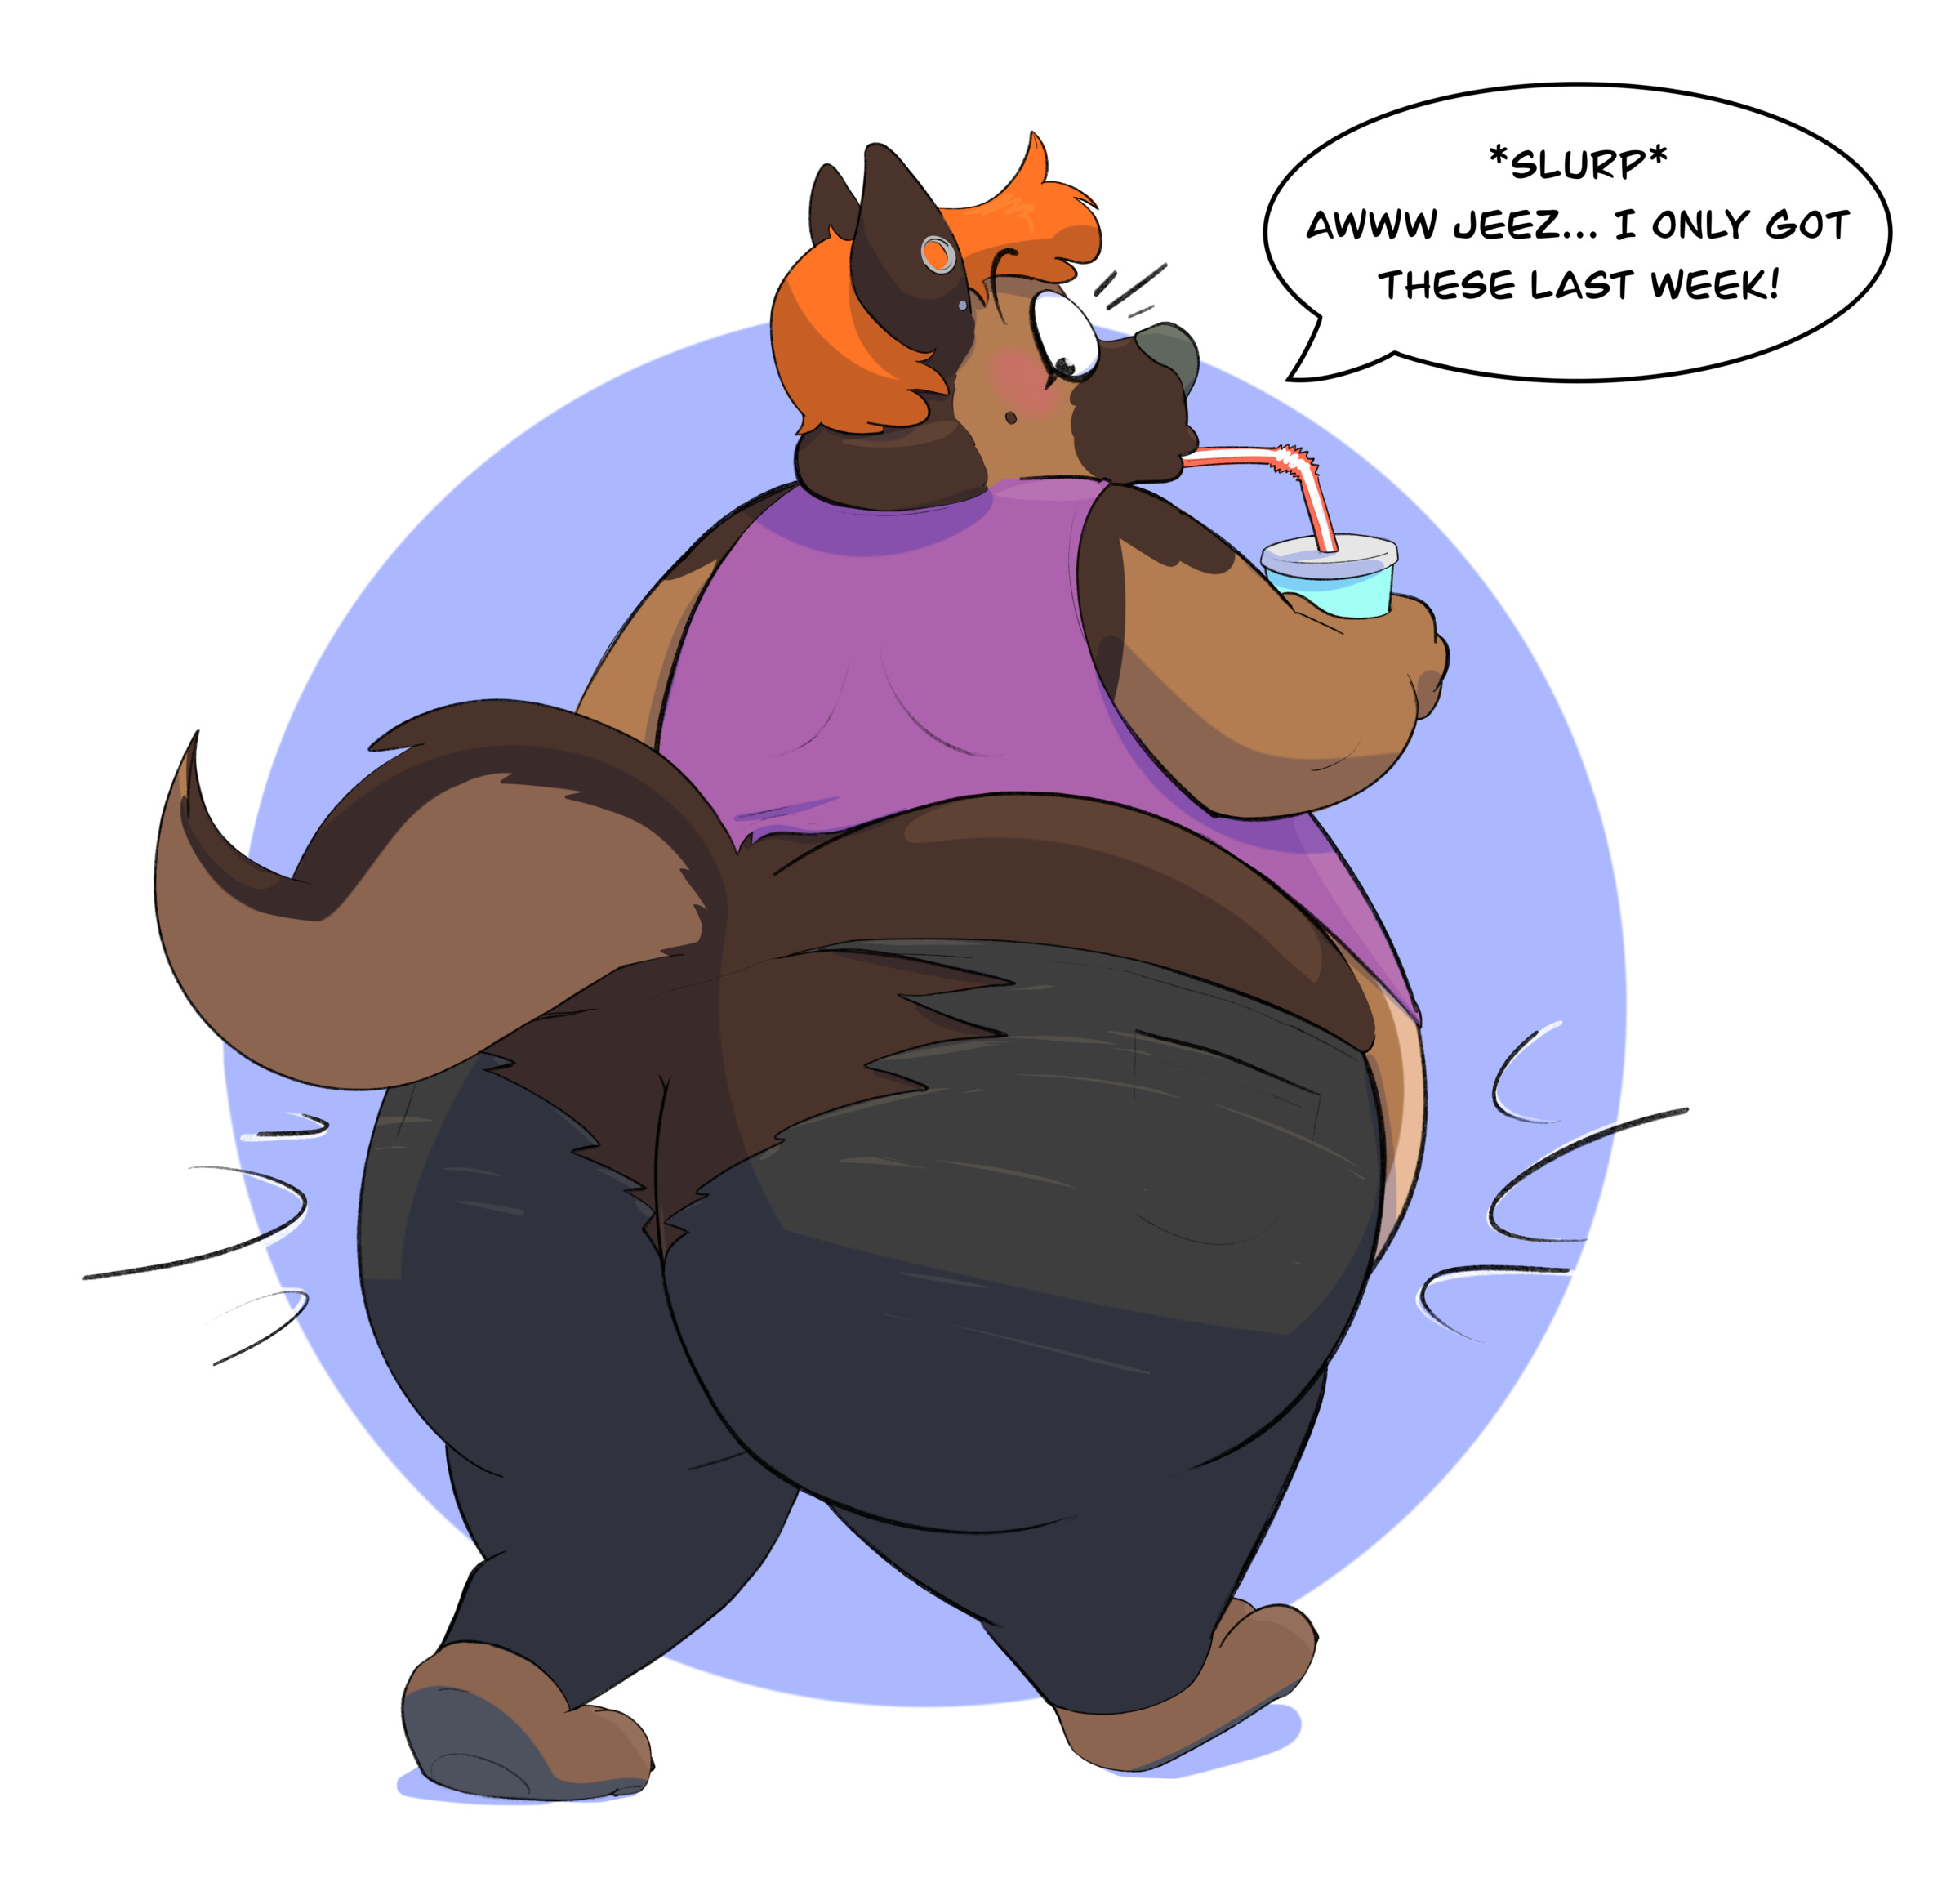 A fat cartoon German shepherd drinking soda. Her trousers have ripped open at the back. A speech bubble in the top right says “Slurp - Awww jeez, I only got these last week!”